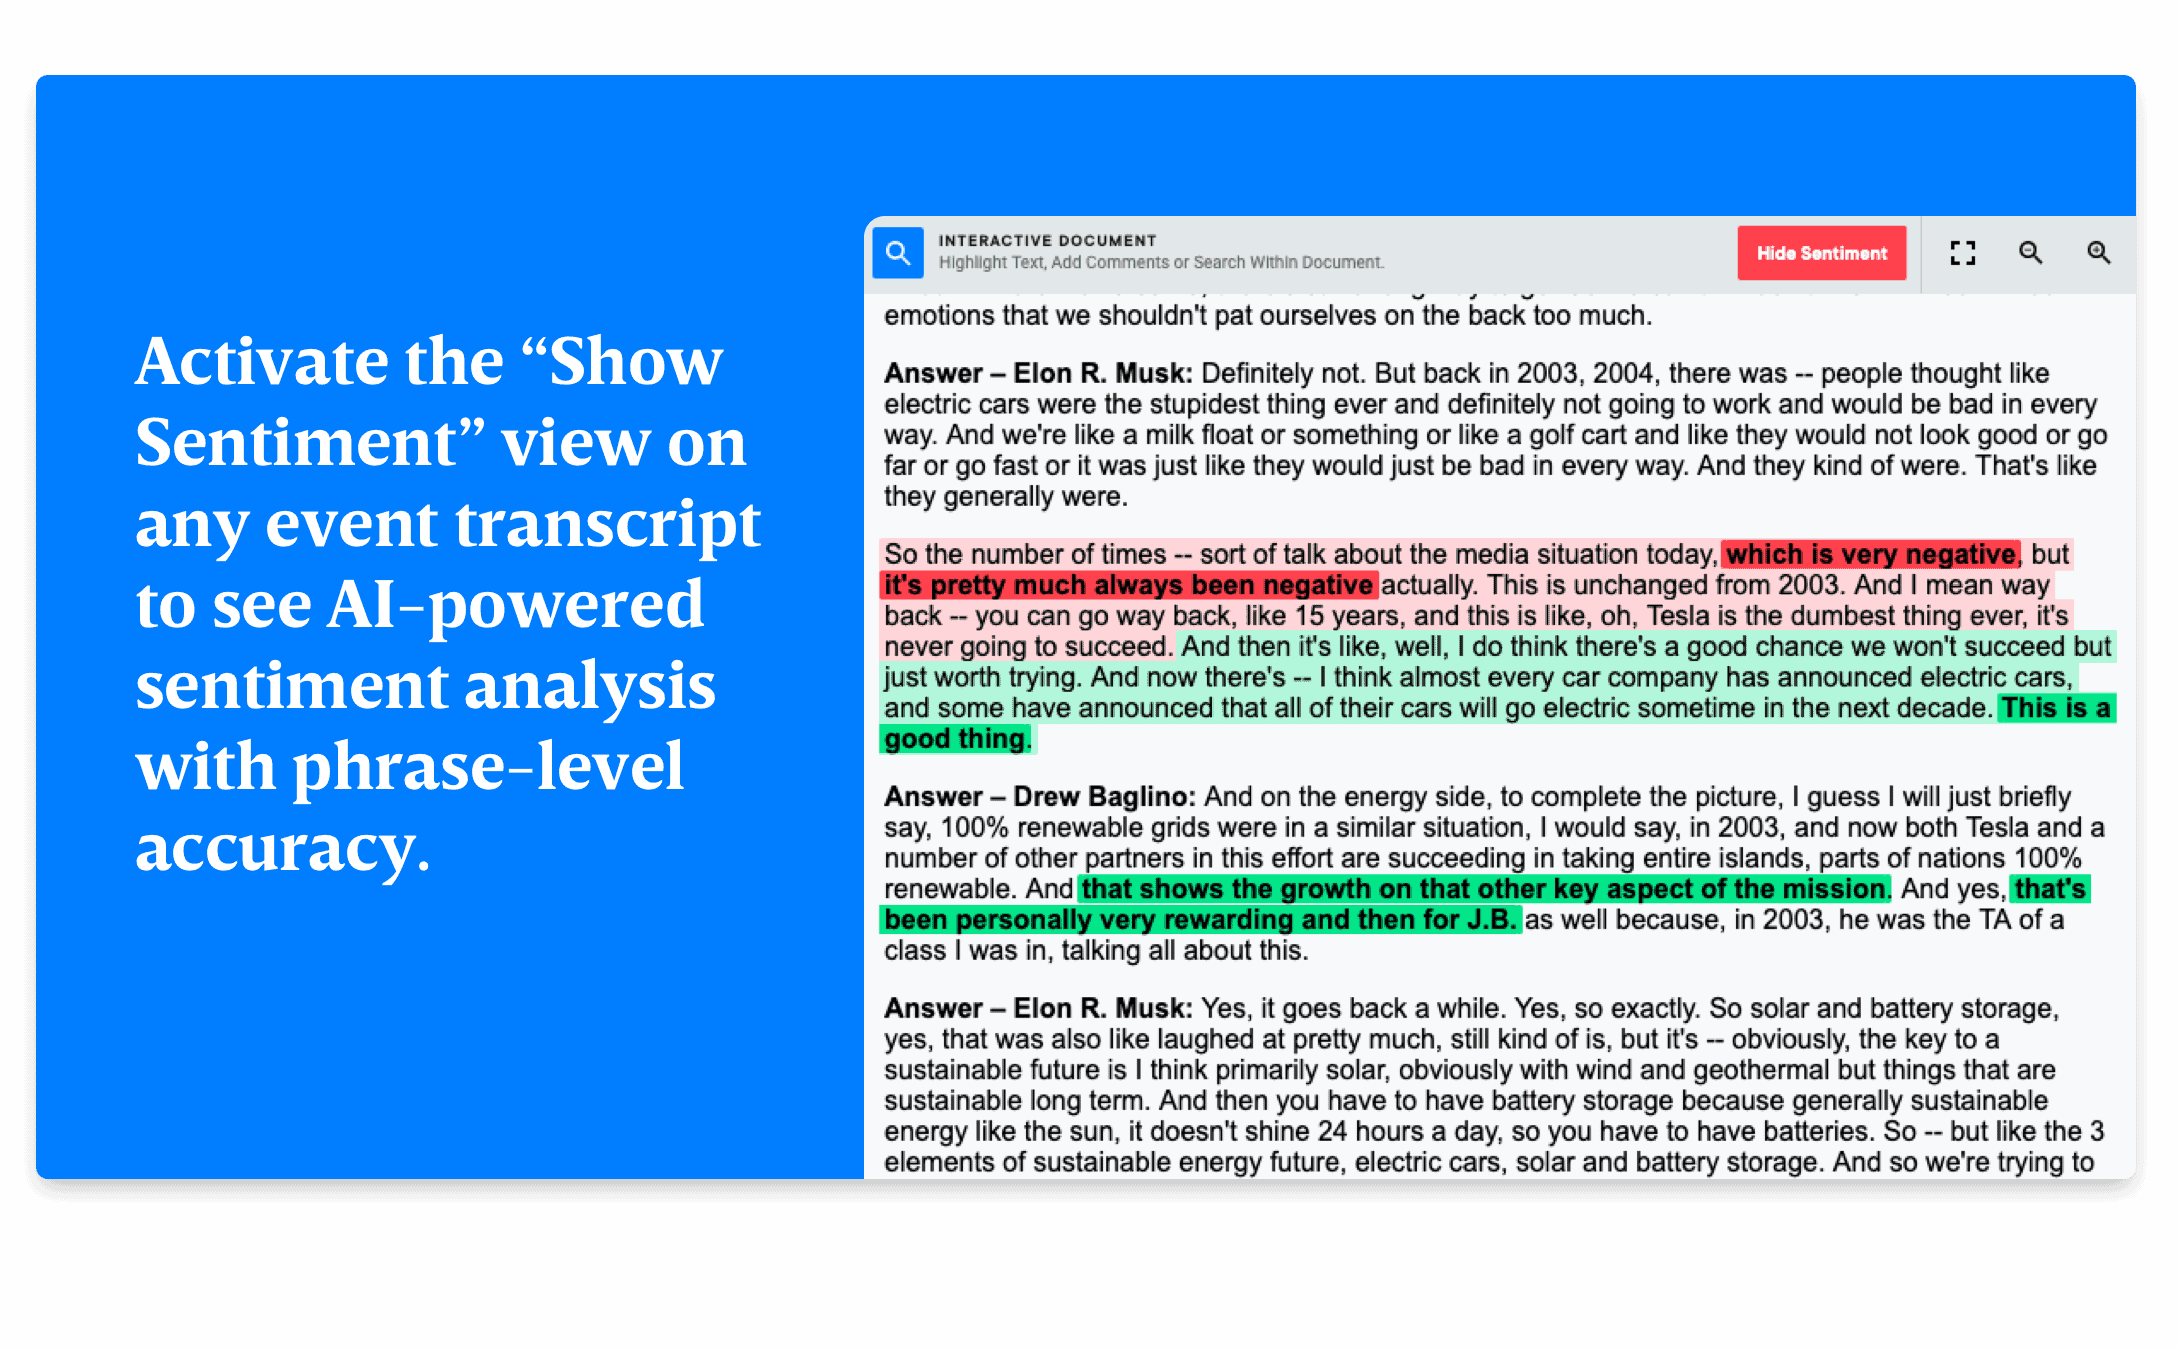 Activate the Show Sentiment view on any event transcript to see AI-powered sentiment analysis with phrase-level accuracy.